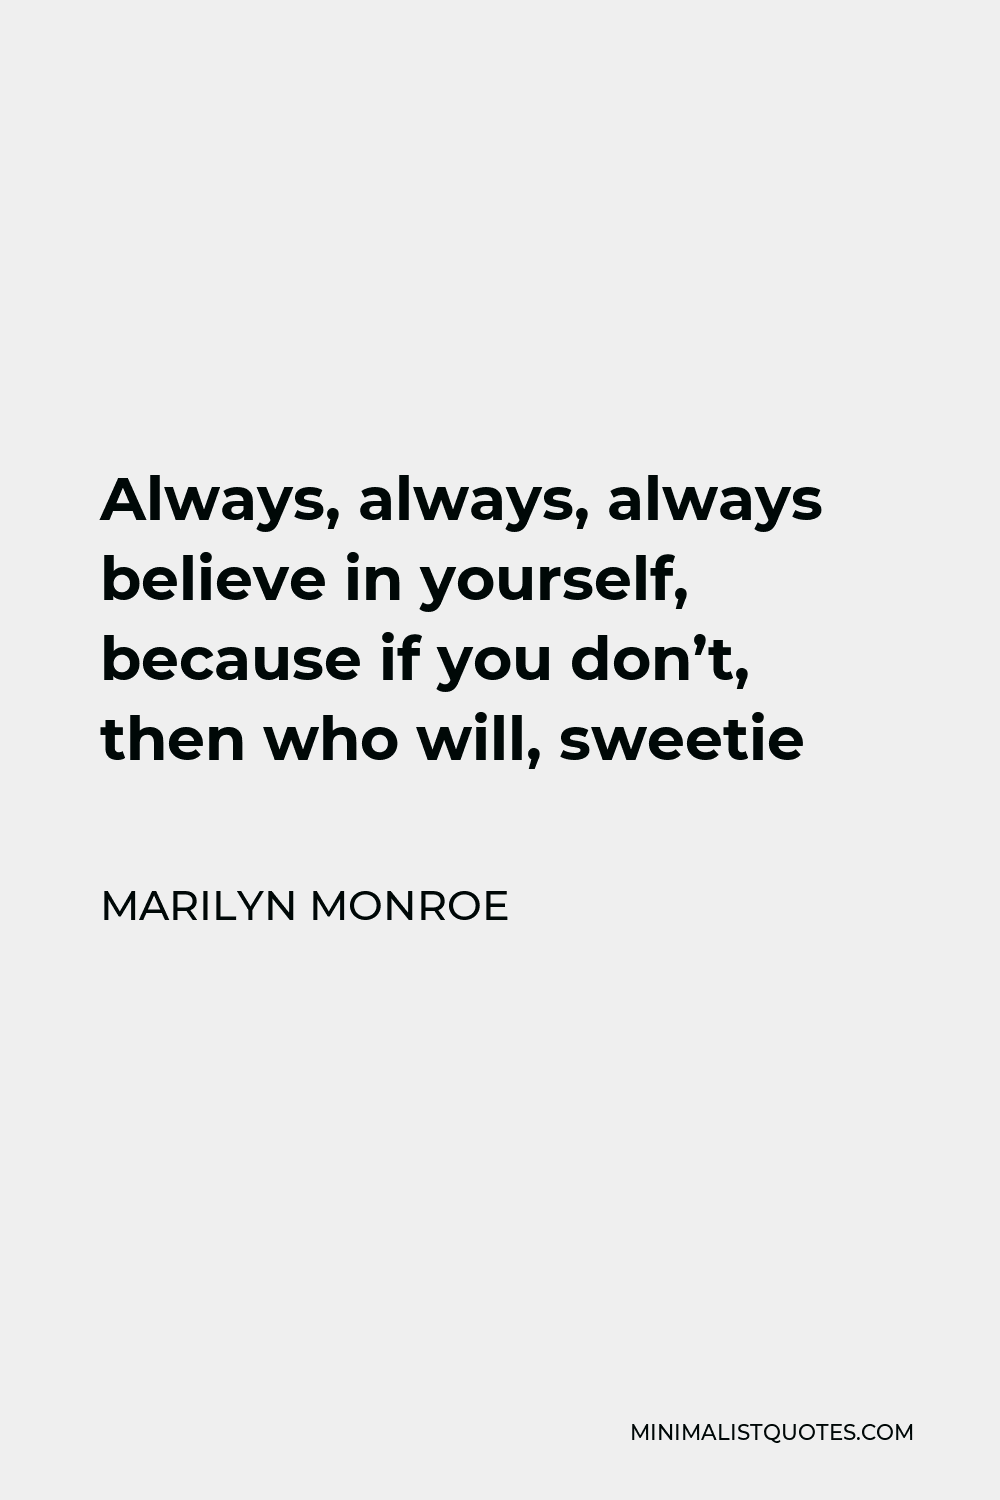 Marilyn Monroe Quote - Always, always, always believe in yourself, because if you don’t, then who will, sweetie